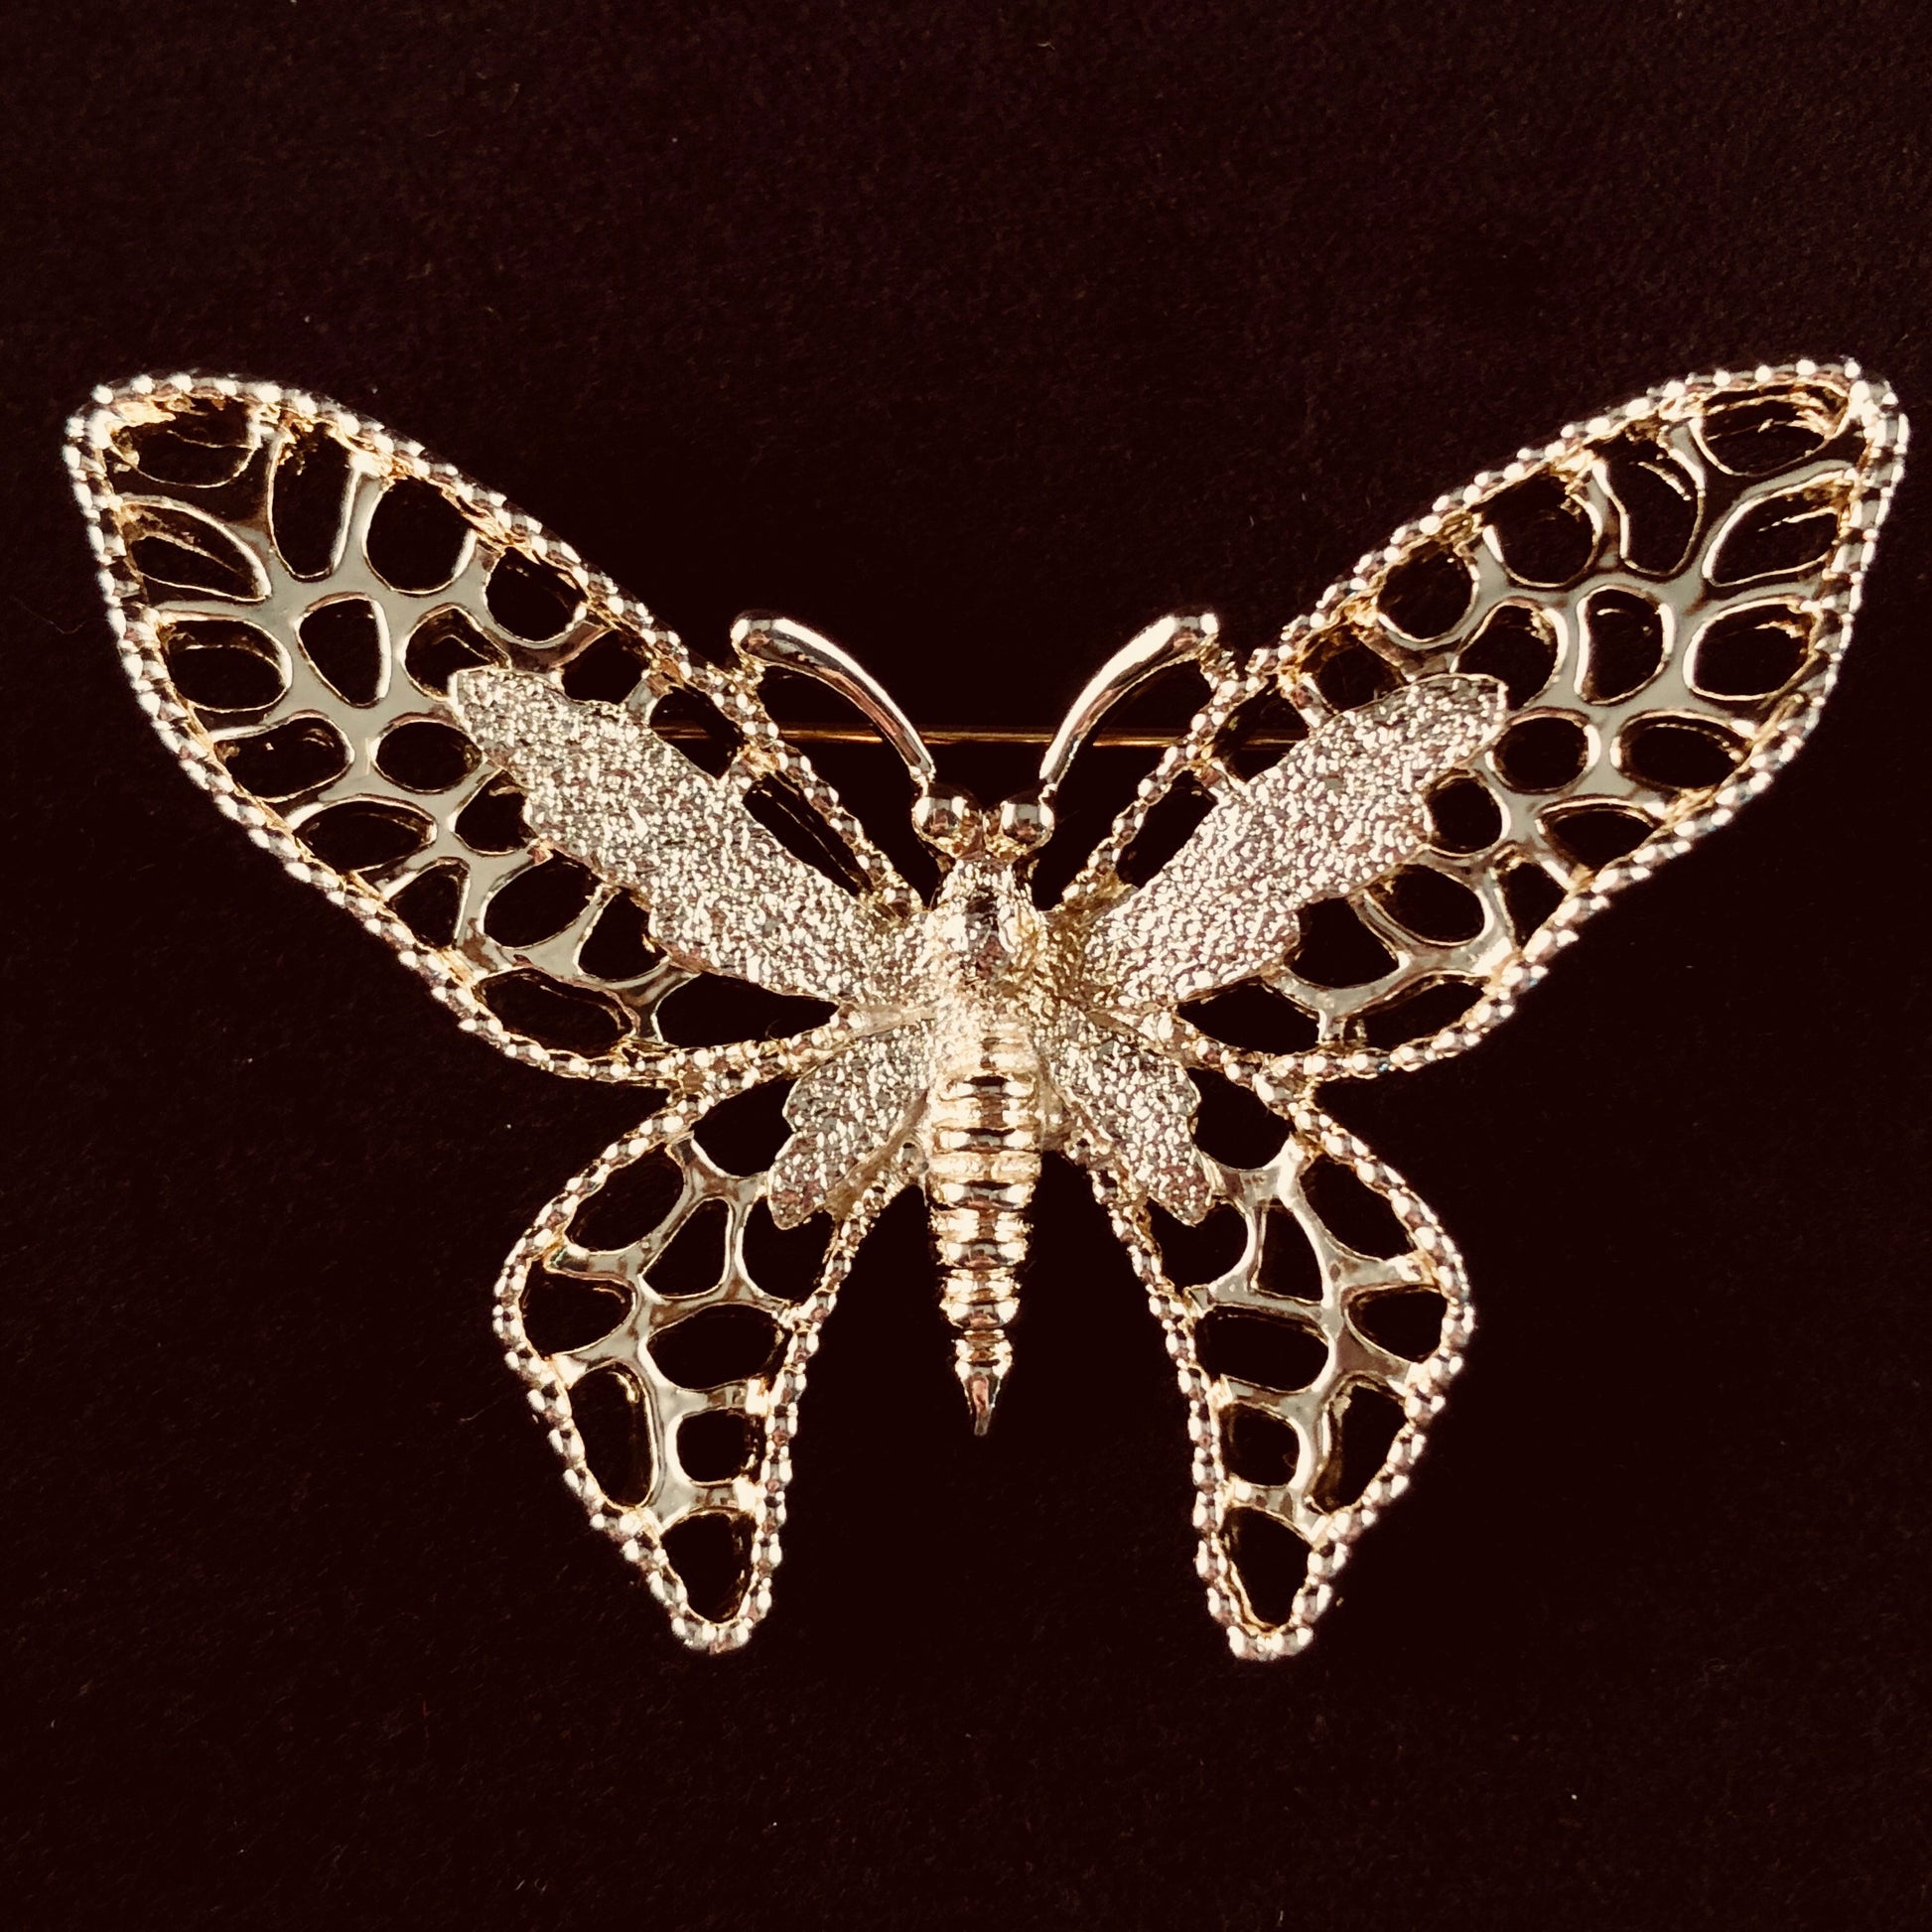 1971 Sarah Coventry Madam Butterfly Gold Brooch - Retro Kandy Vintage